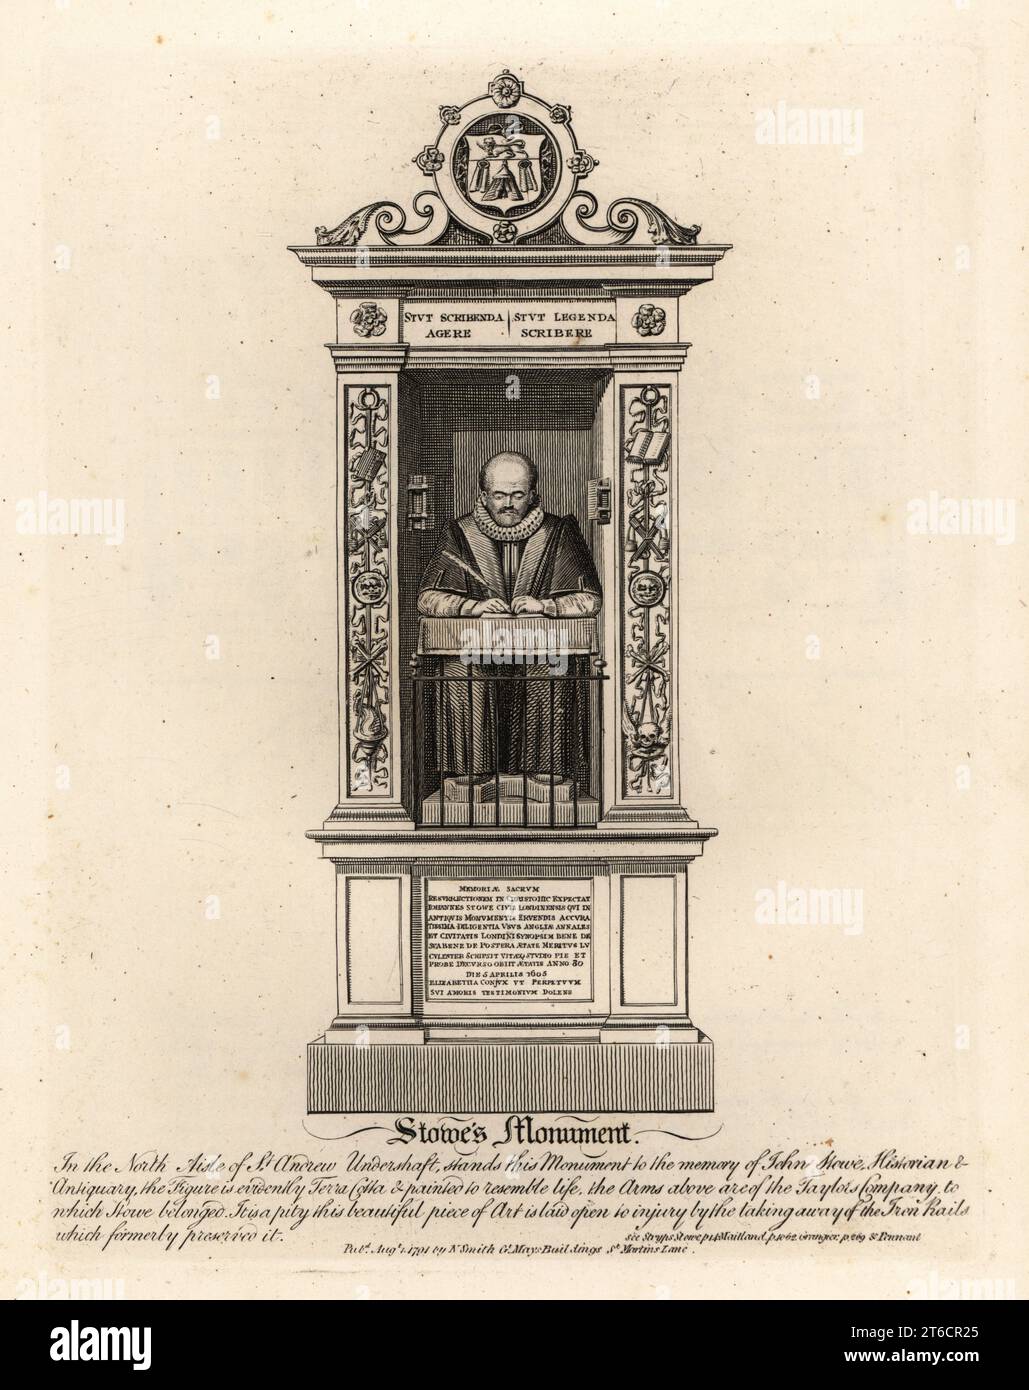 John Stowe, Historian and Antiquarian, 1525-1605, from his monument in the Church of St. Andrew, Undershaft. Depicted in an Elizabethen ruff holding a quill pen seated at a desk. Copperplate engraving by John Thomas Smith after original drawings by members of the Society of Antiquaries from his J.T. Smiths Antiquities of London and its Environs, J. Sewell, R. Folder, J. Simco, London, 1791. Stock Photo